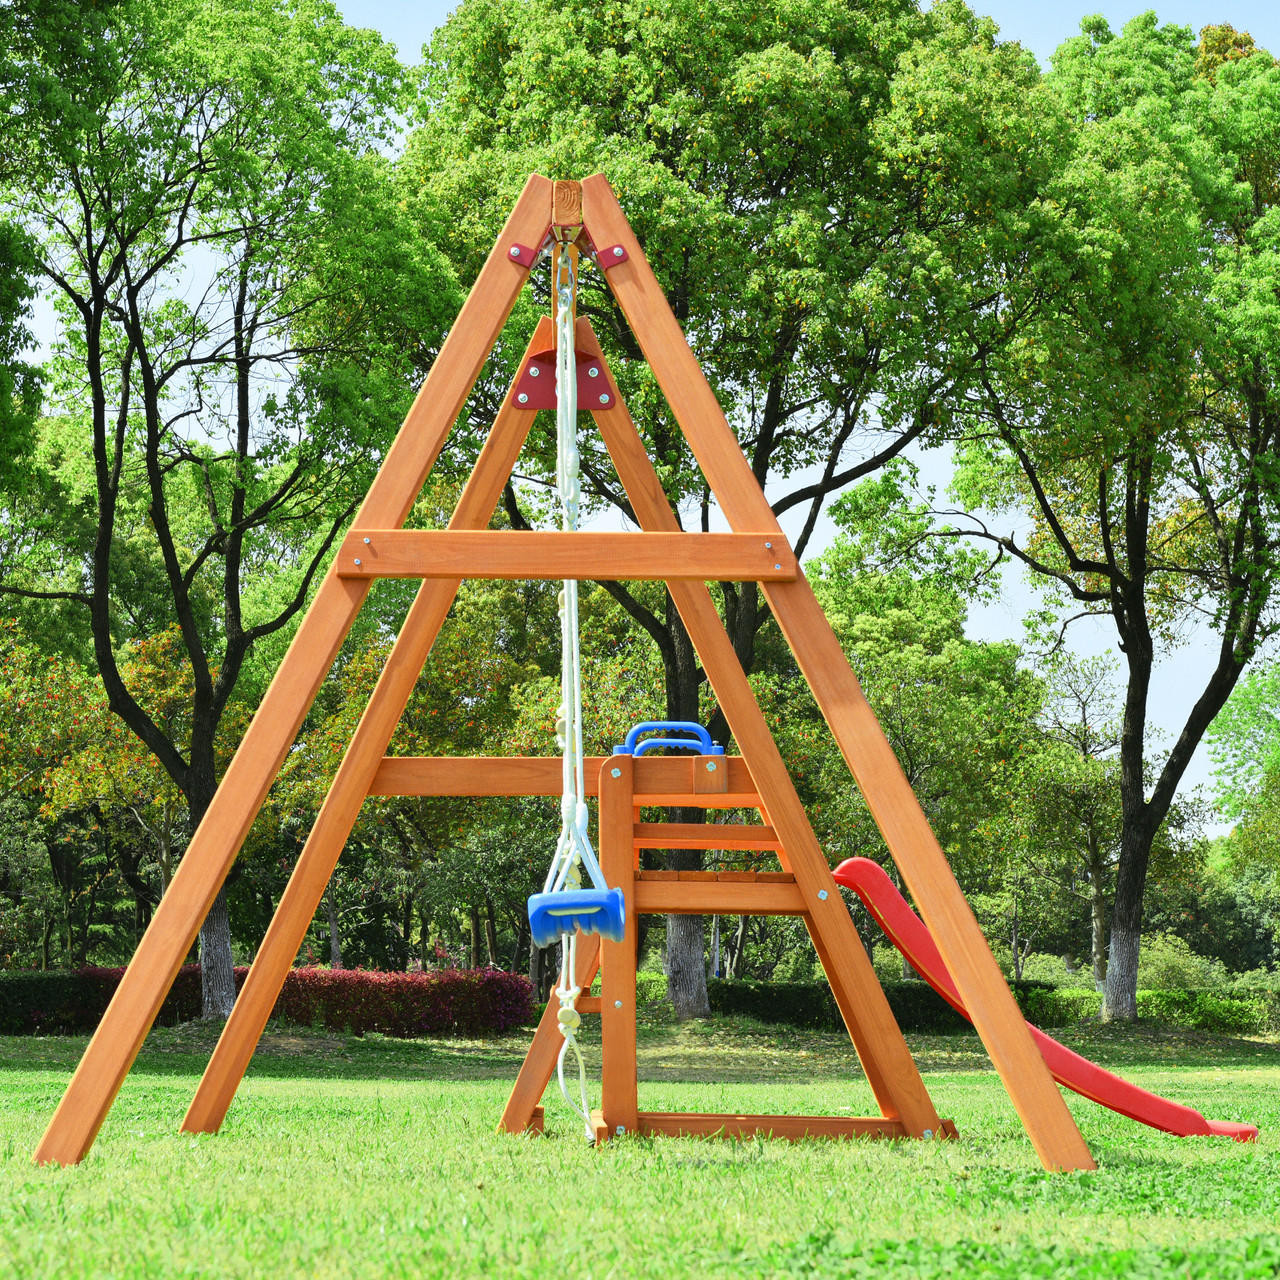 Chicken Pieces Wooden Swing Set with Slide | Outdoor Playset for Toddlers | Swing-N-Slide Set Kids Climbers 